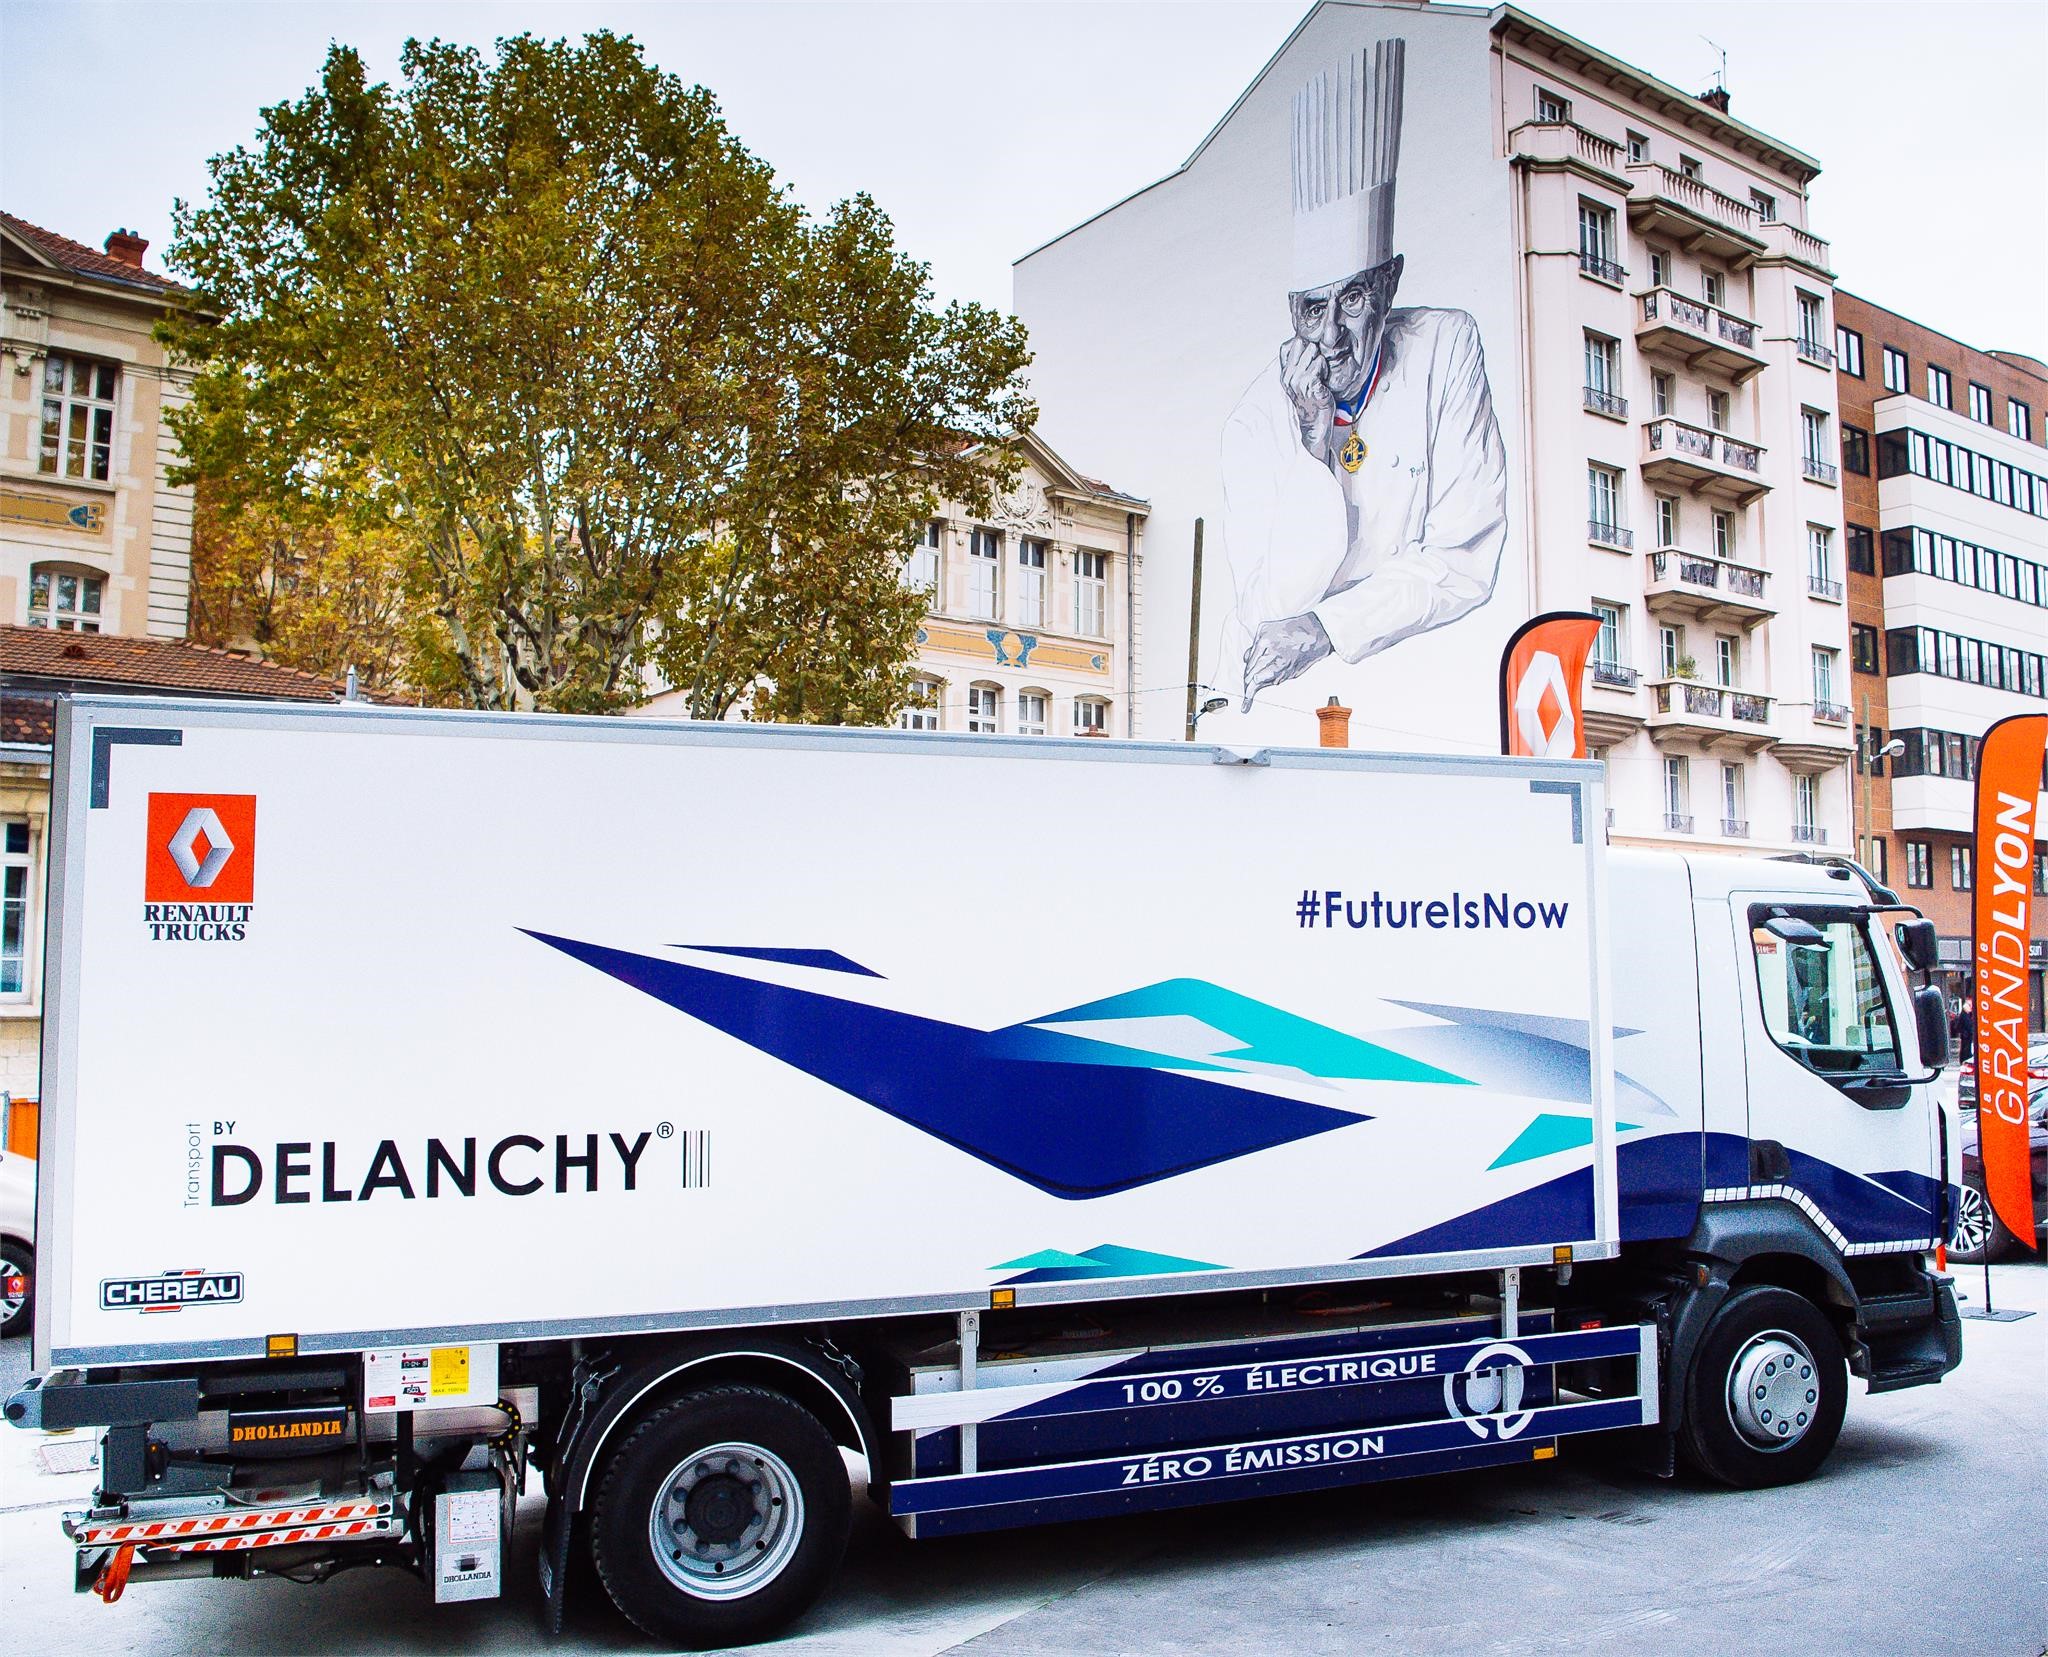 Refrigerated Truck with Electric Power Train Launched by Renault